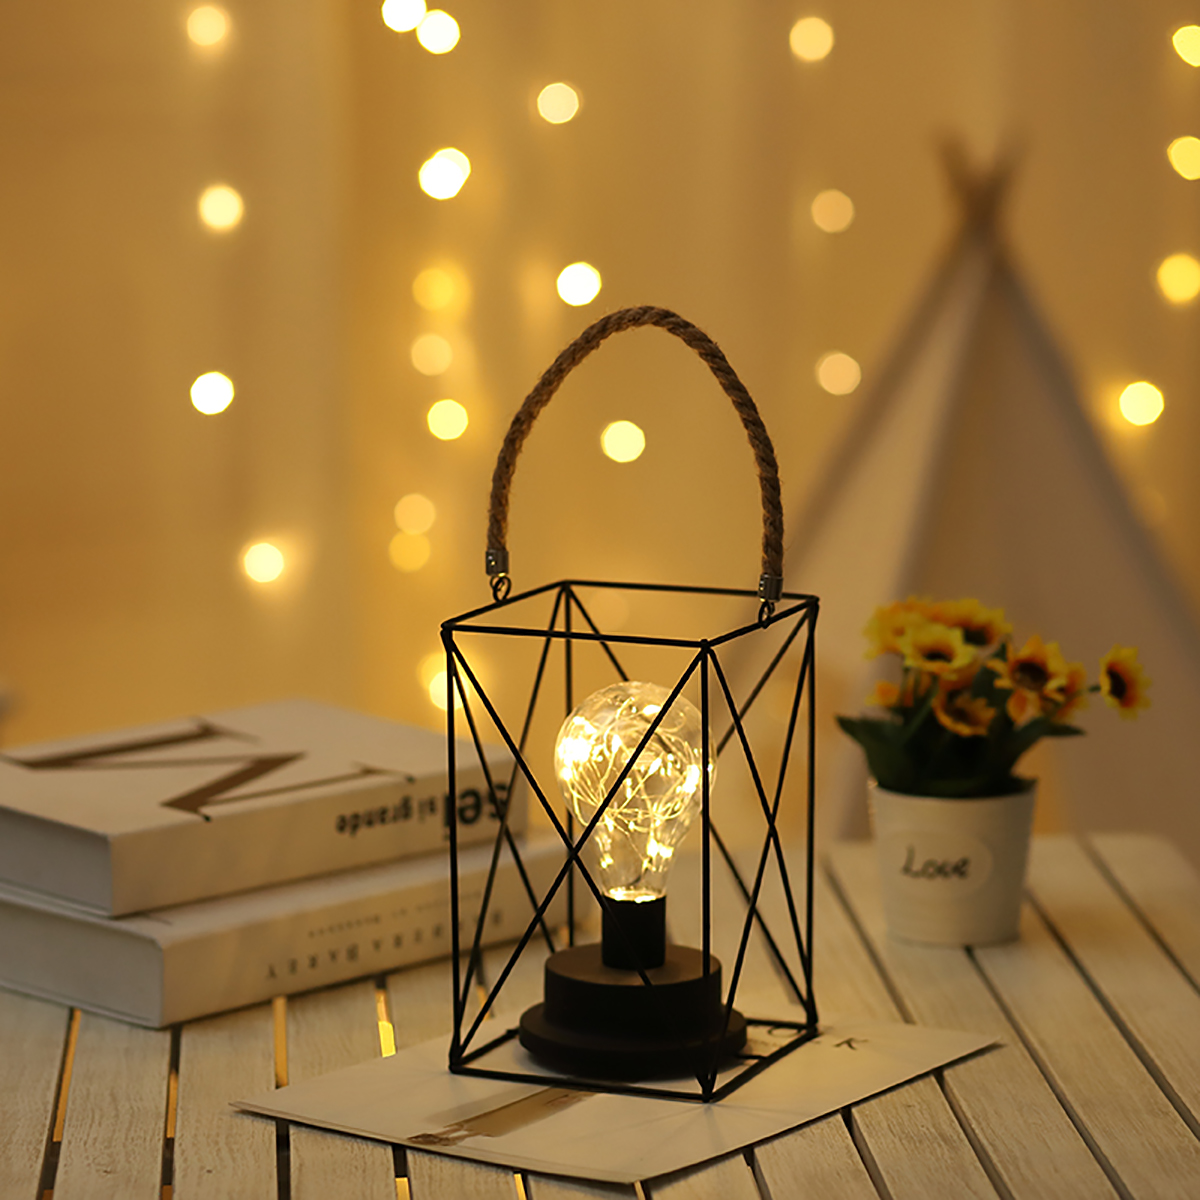 Retro-Cage-Light-Mini-Metal-Battery-Powered-LED-Bulb-Lamp-for-Living-Room-Bedroom-Kitchen-Wedding-Ch-1733946-3